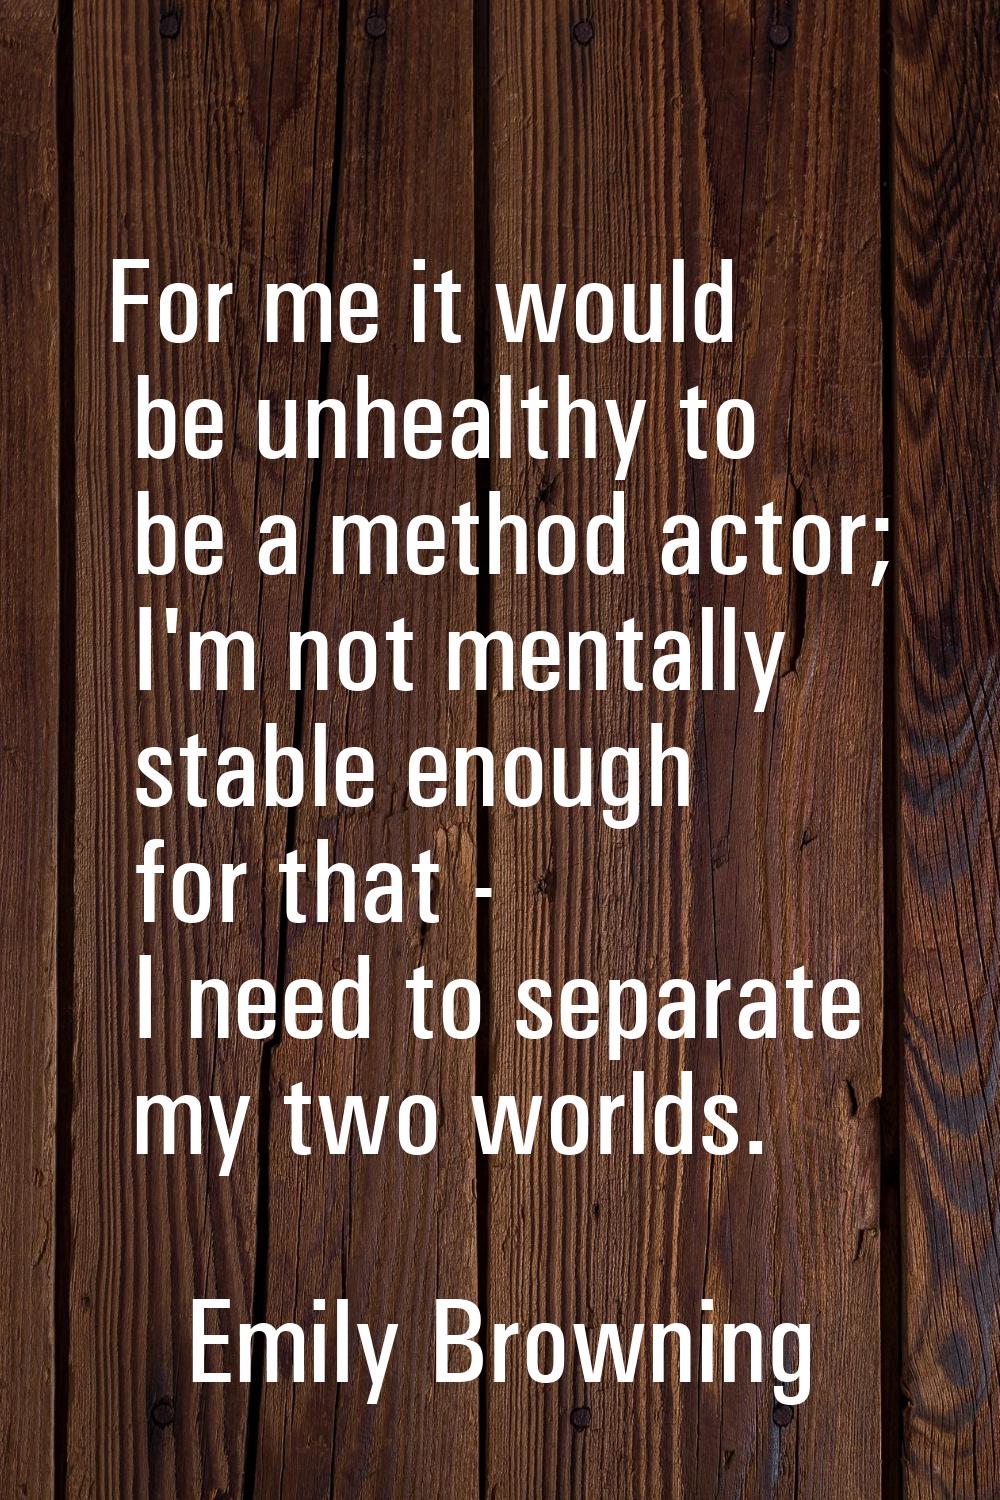 For me it would be unhealthy to be a method actor; I'm not mentally stable enough for that - I need